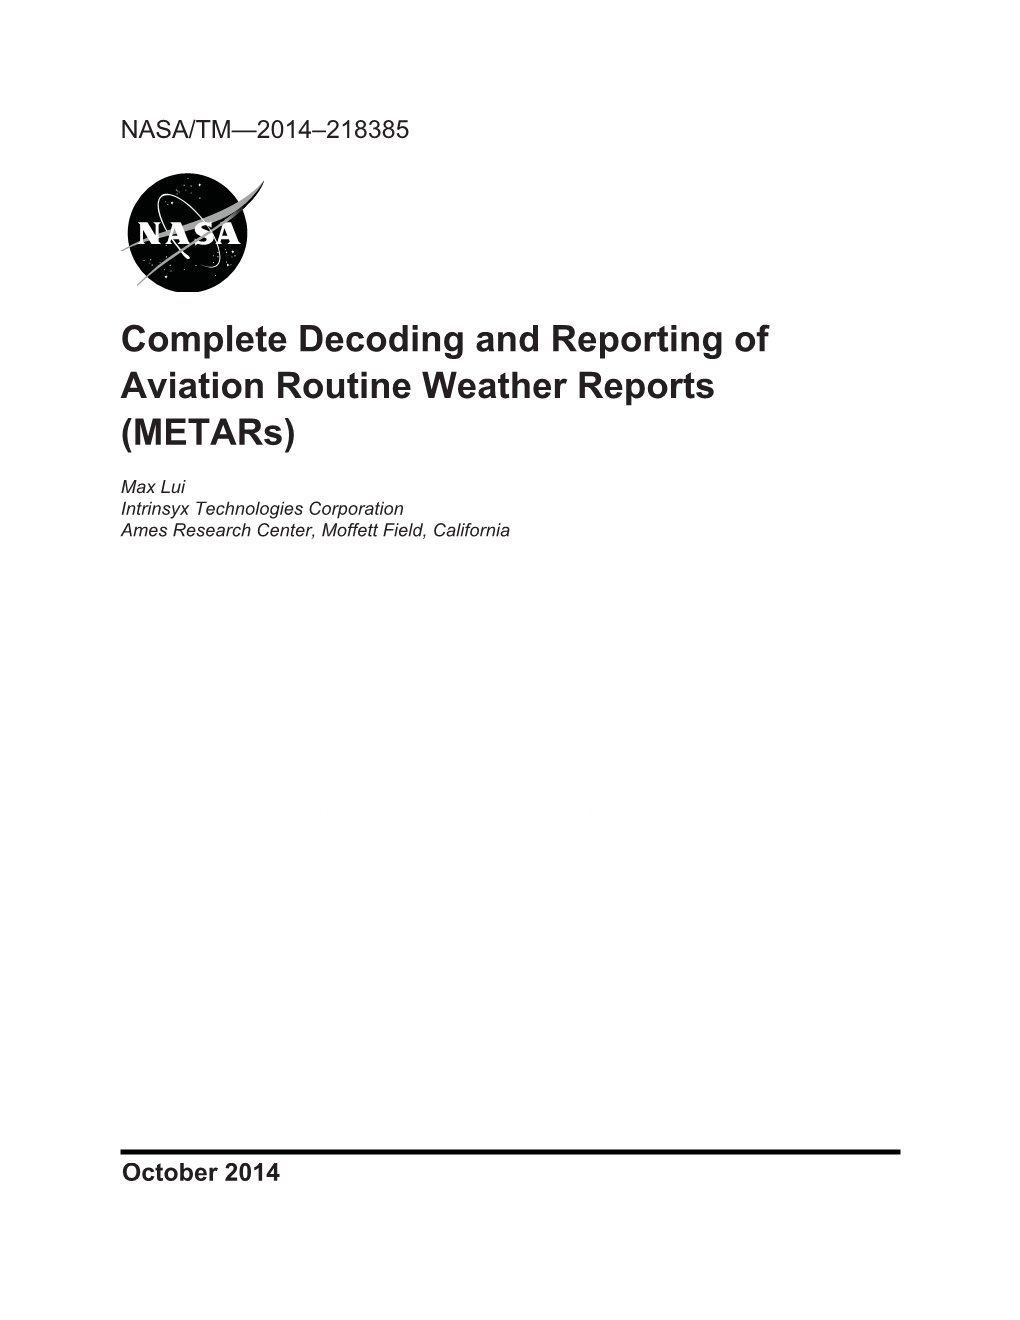 Complete Decoding and Reporting of Aviation Routine Weather Reports (Metars)